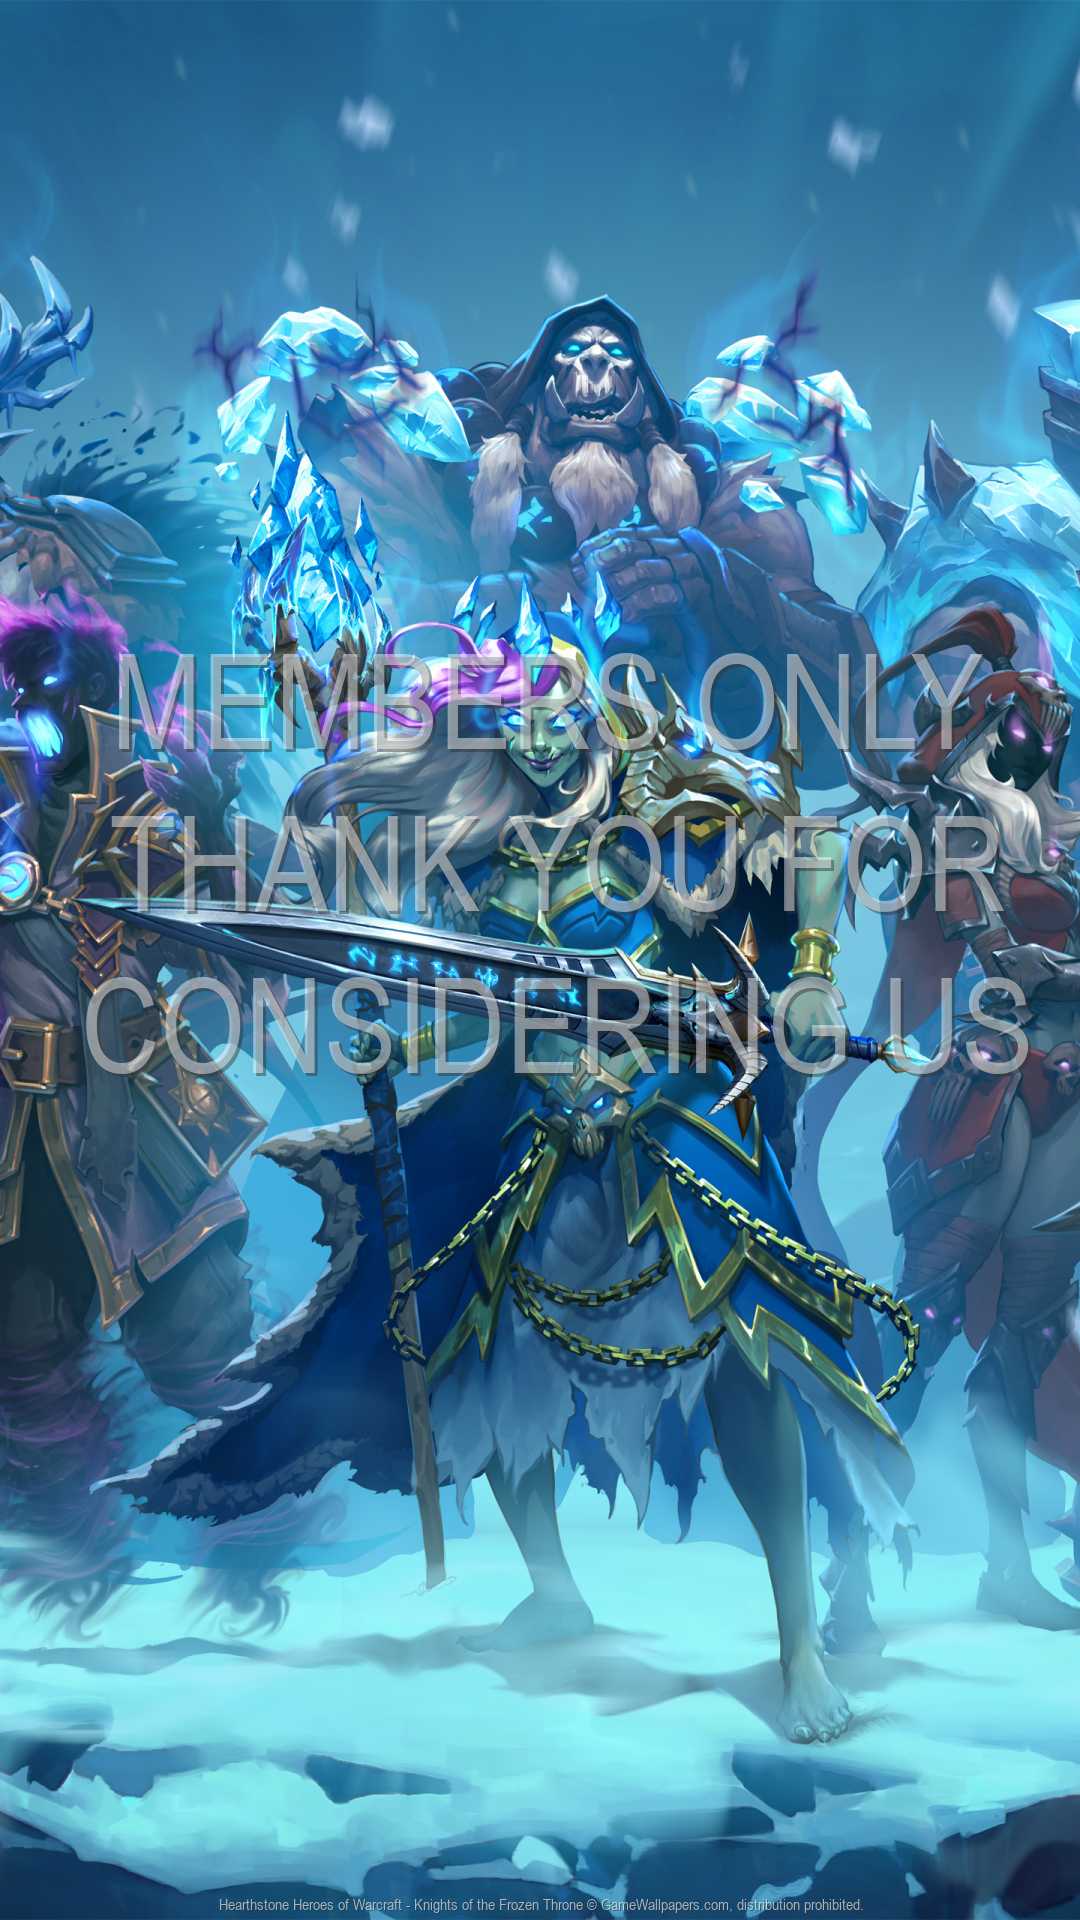 Hearthstone: Heroes of Warcraft - Knights of the Frozen Throne wallpaper 02  1080p Vertical